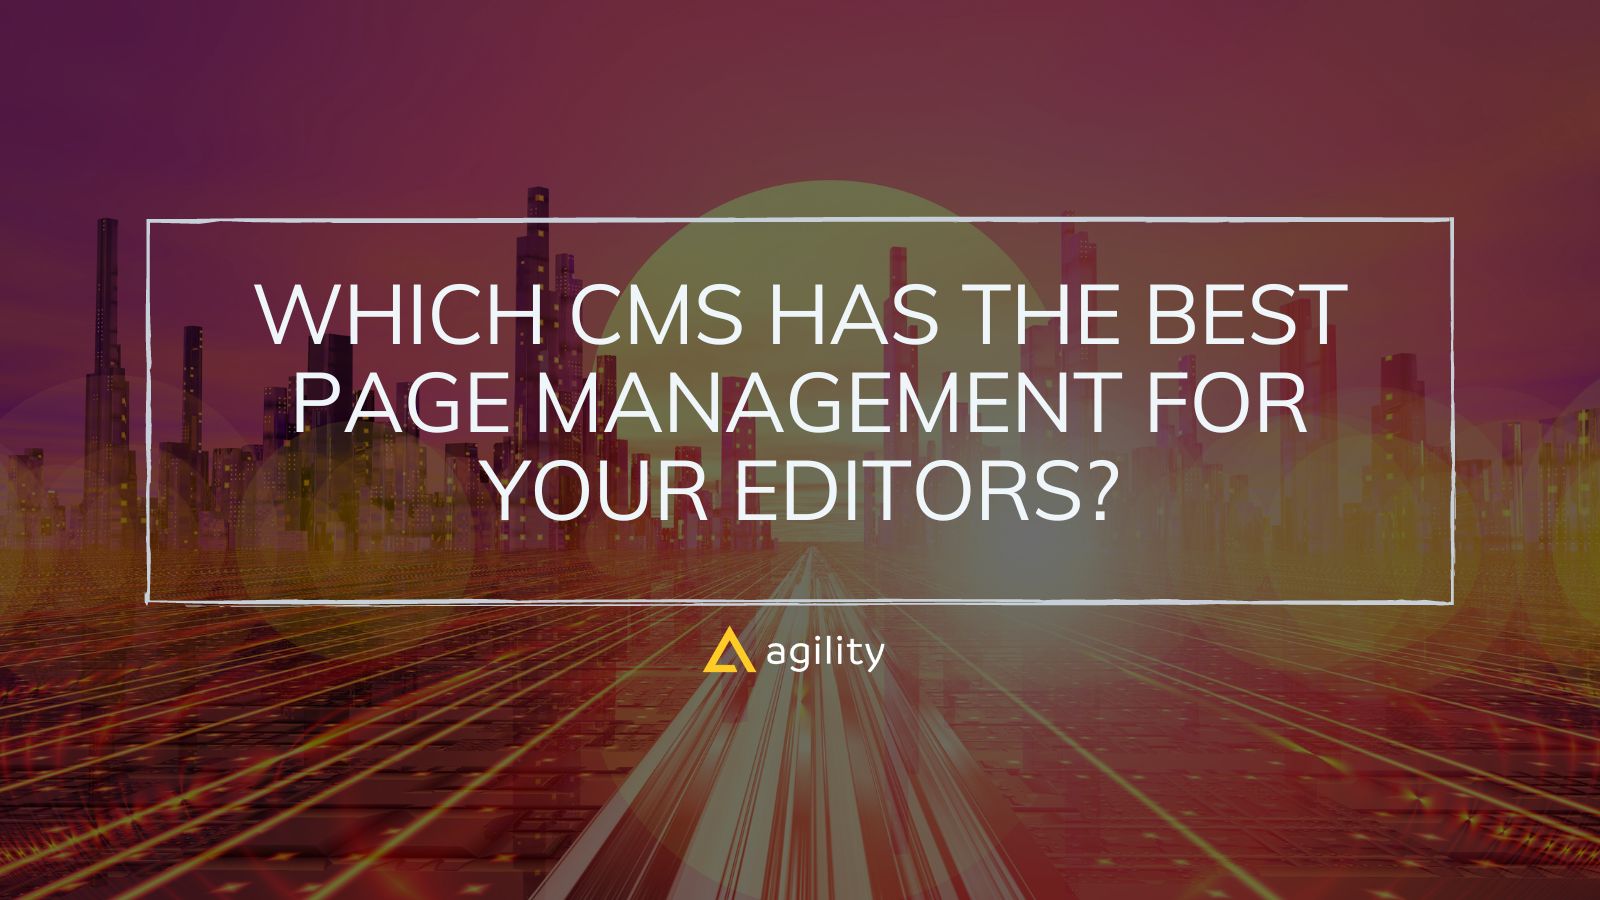  CMS Page Management For Editors